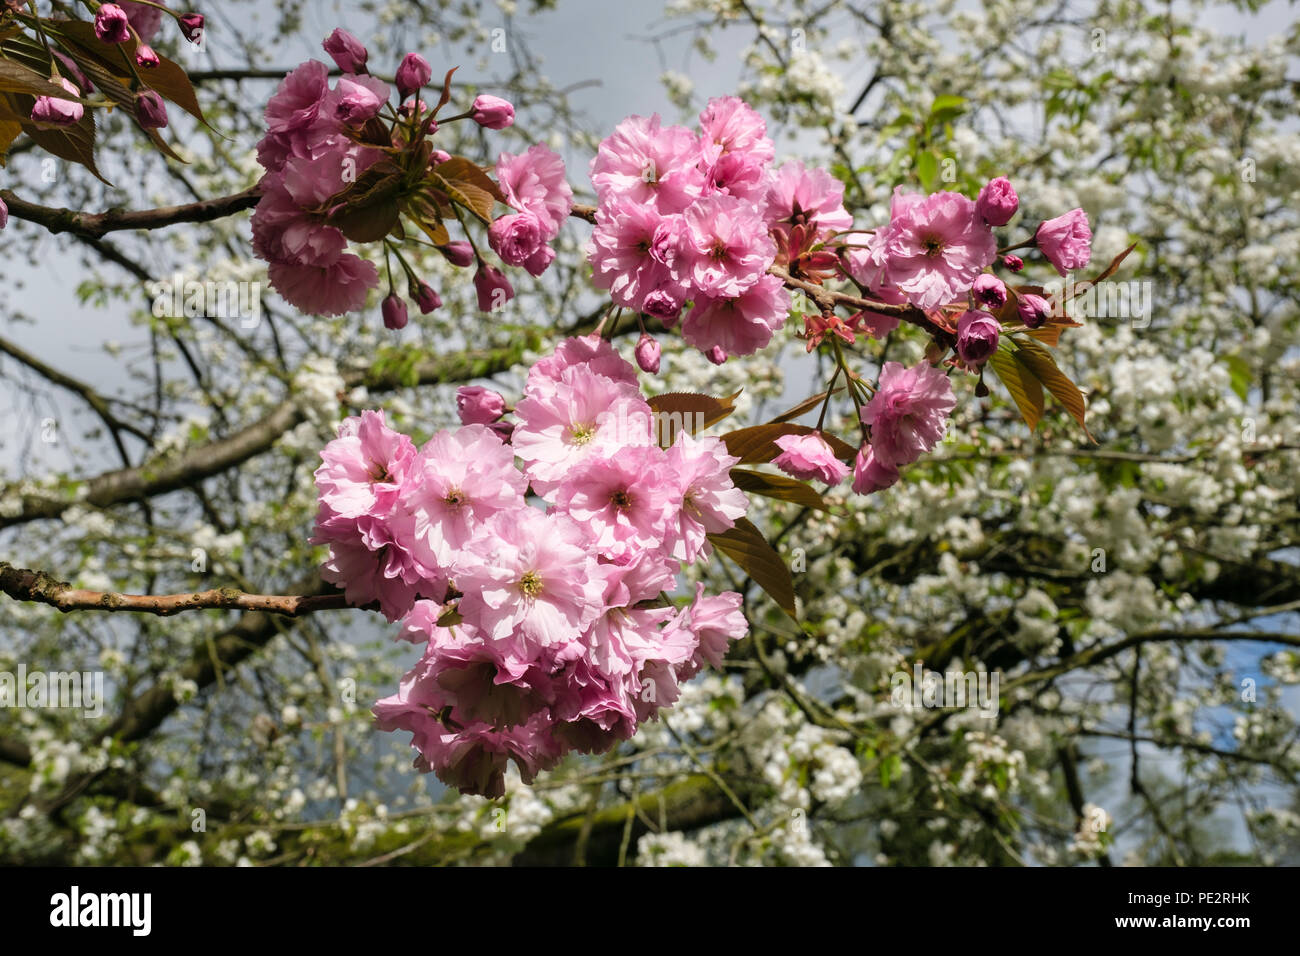 Double pink flowers of ornamental Cherry blossom  Sato Zakura 'Kanzan' against white tree blossom in an urban park in spring. England, UK, Britain Stock Photo